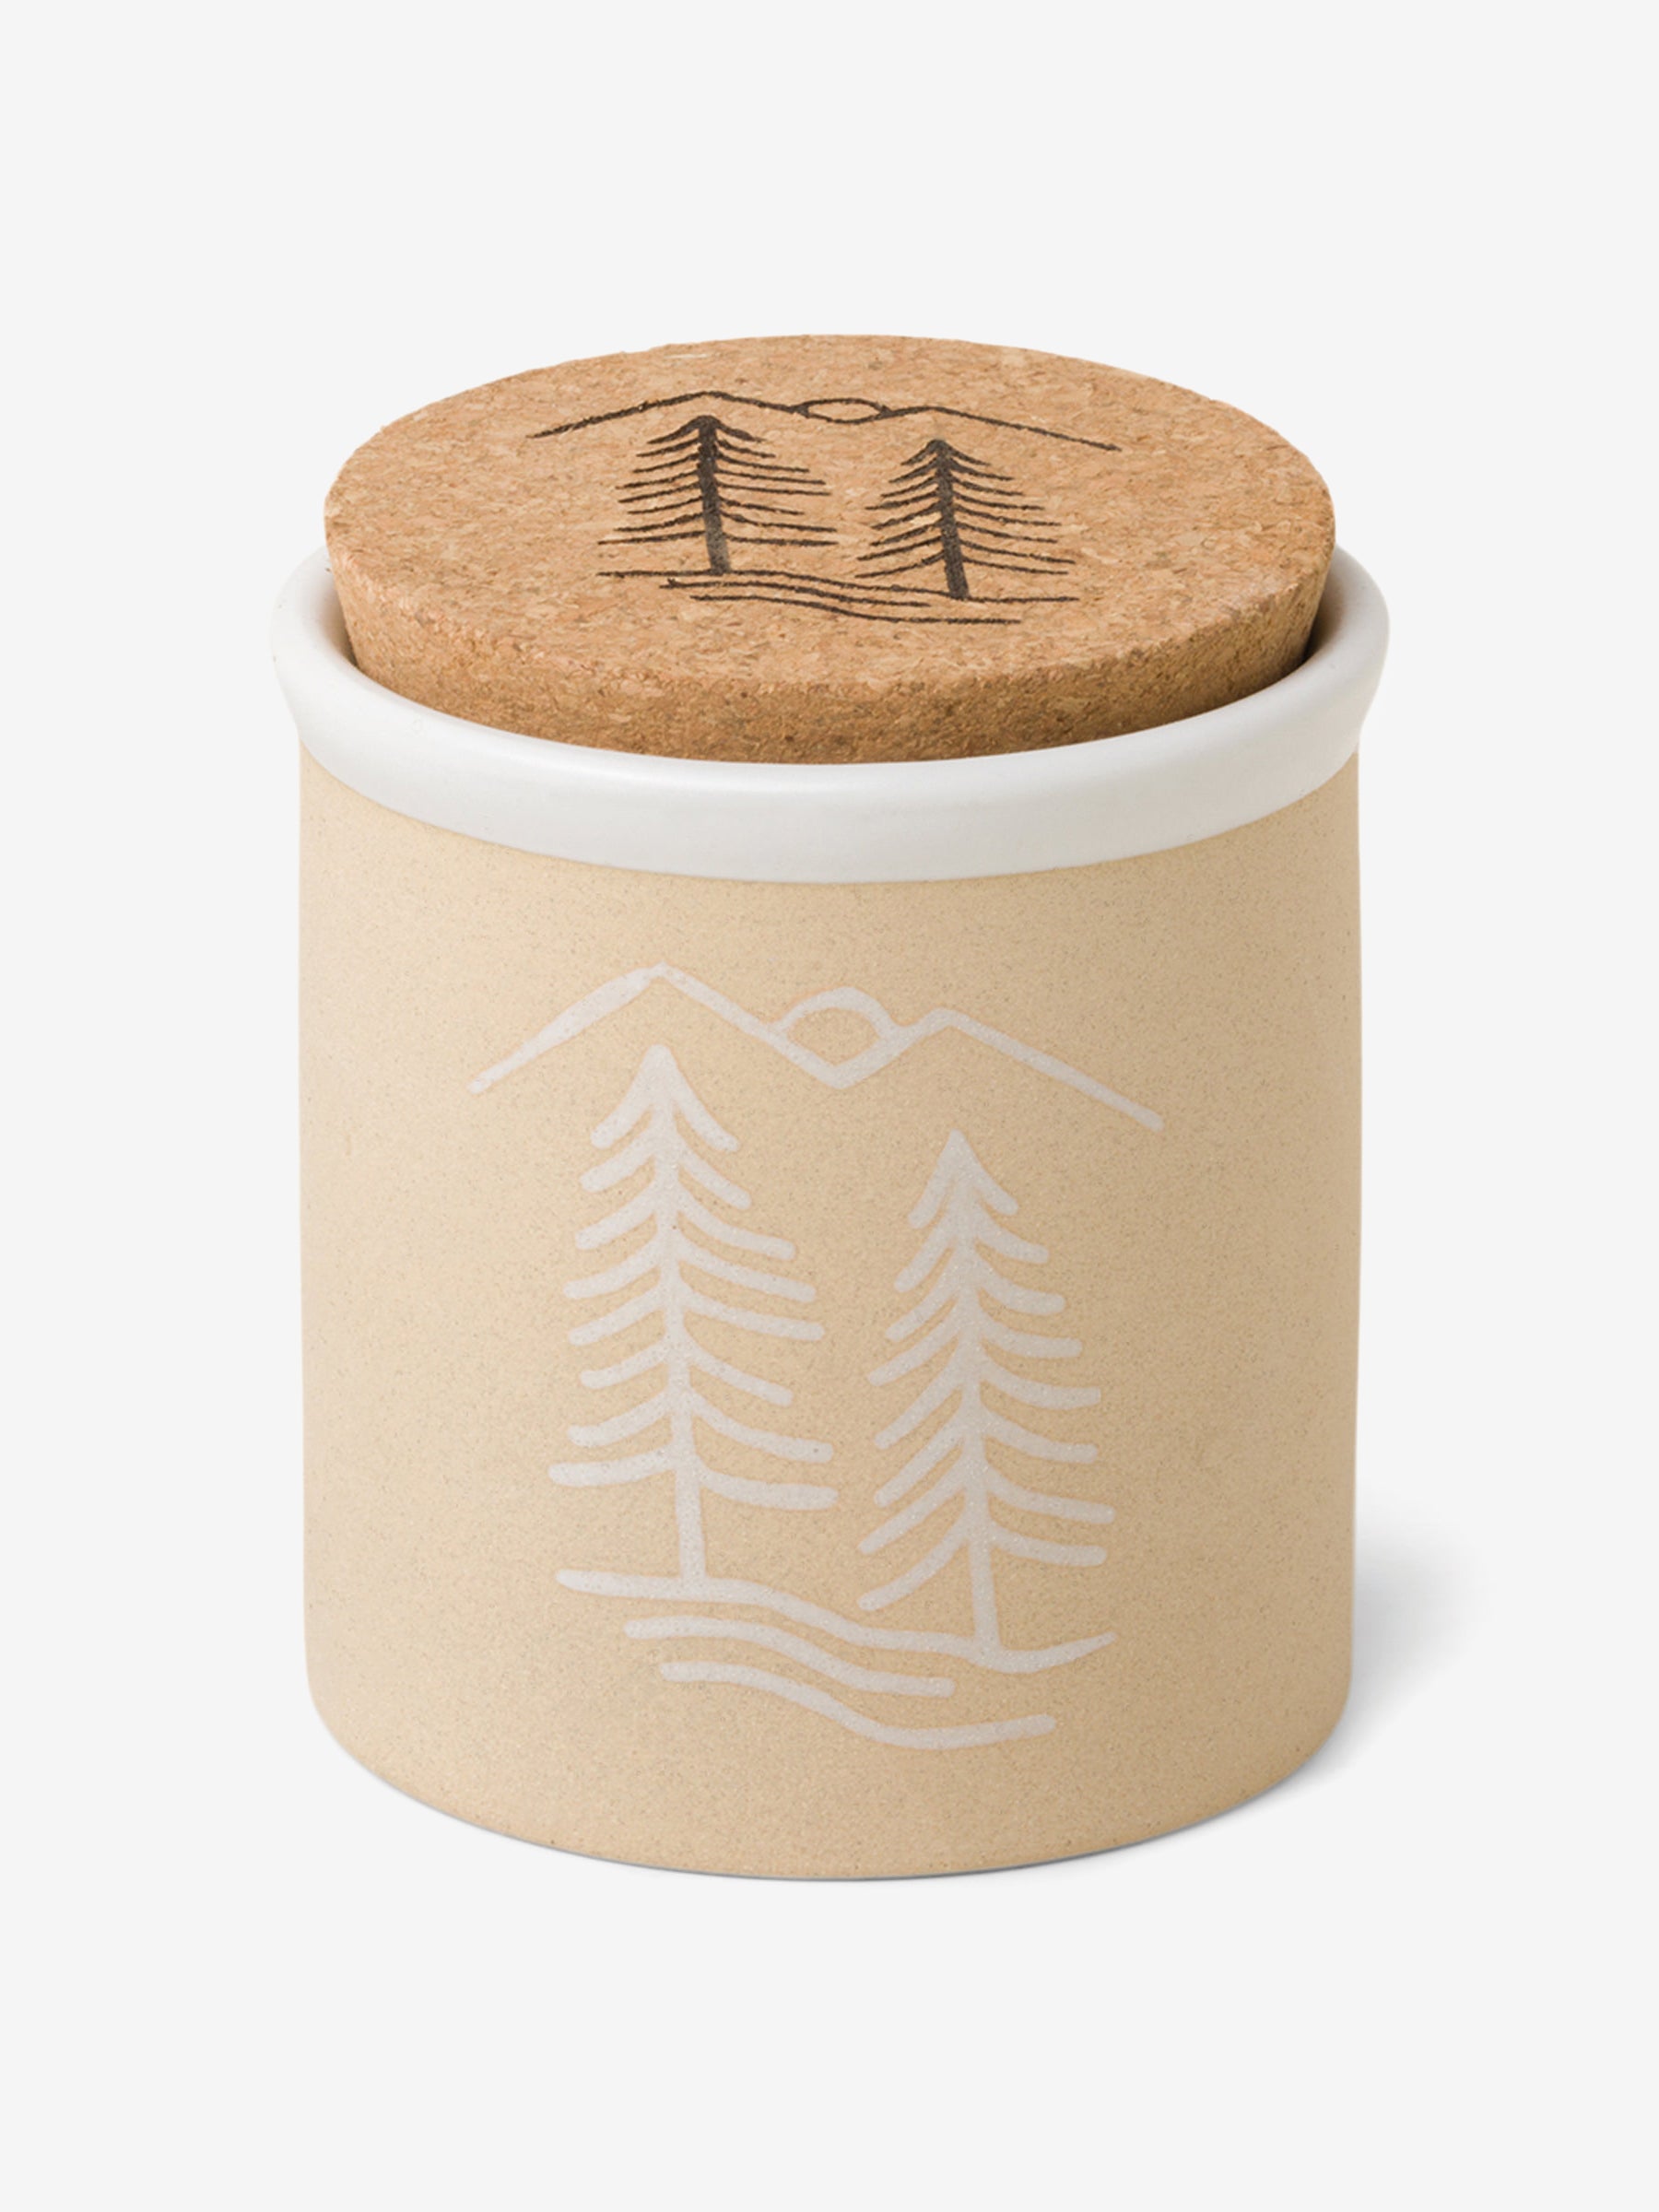 Paddywax Dune Ceramic Candle - Cypress & Fir White